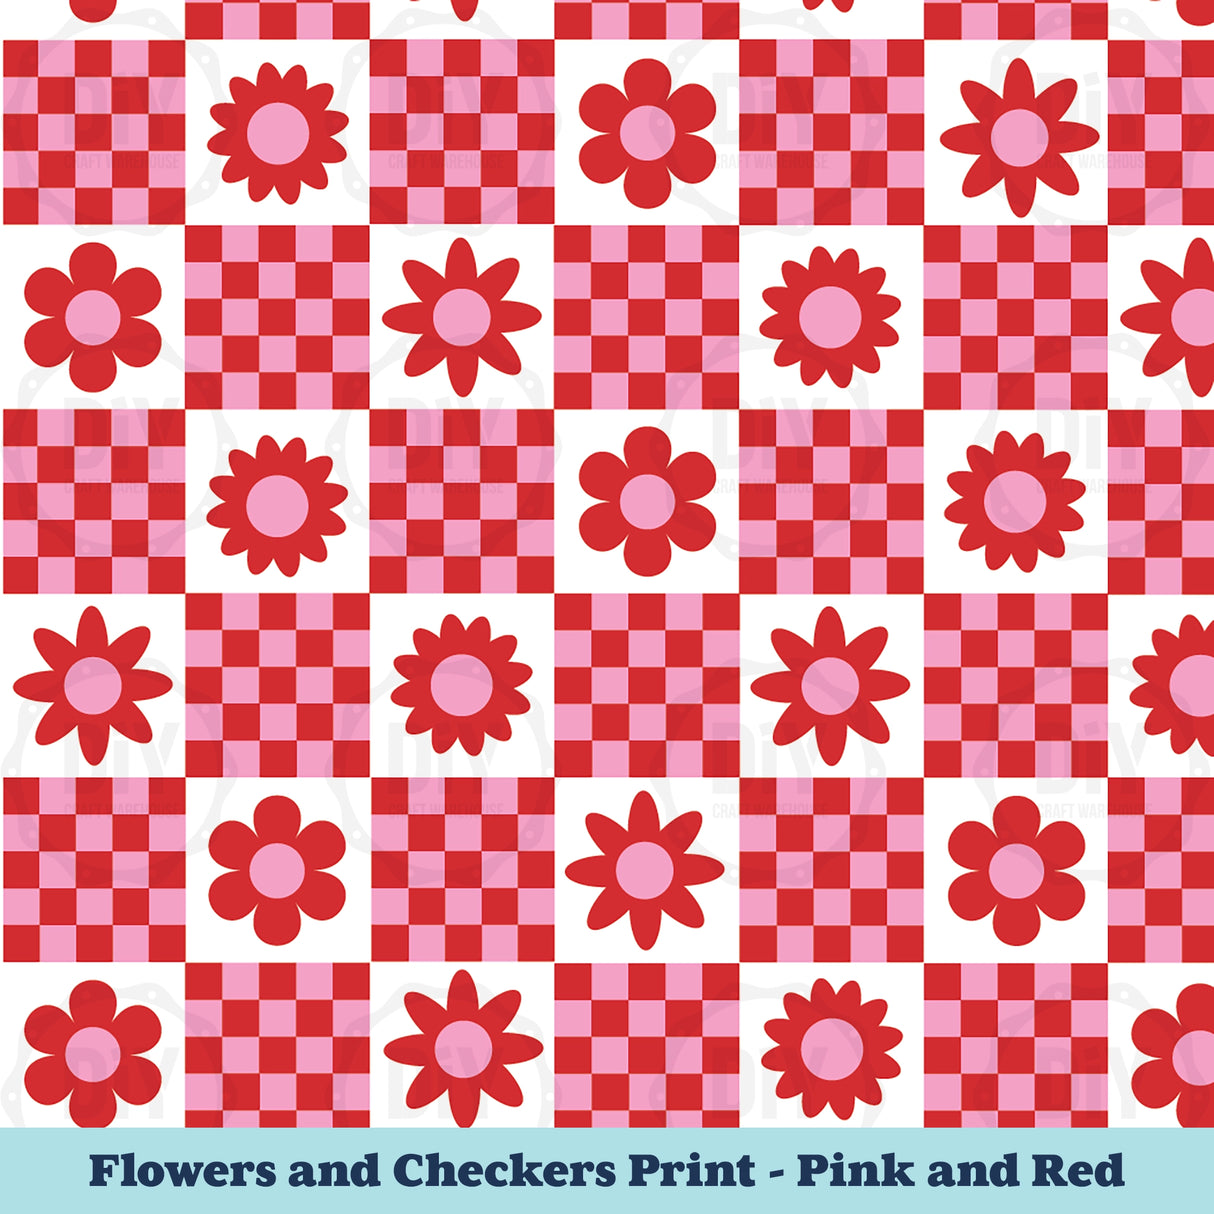 Flowers & Checkers Sublimation Transfer - Pink & Red